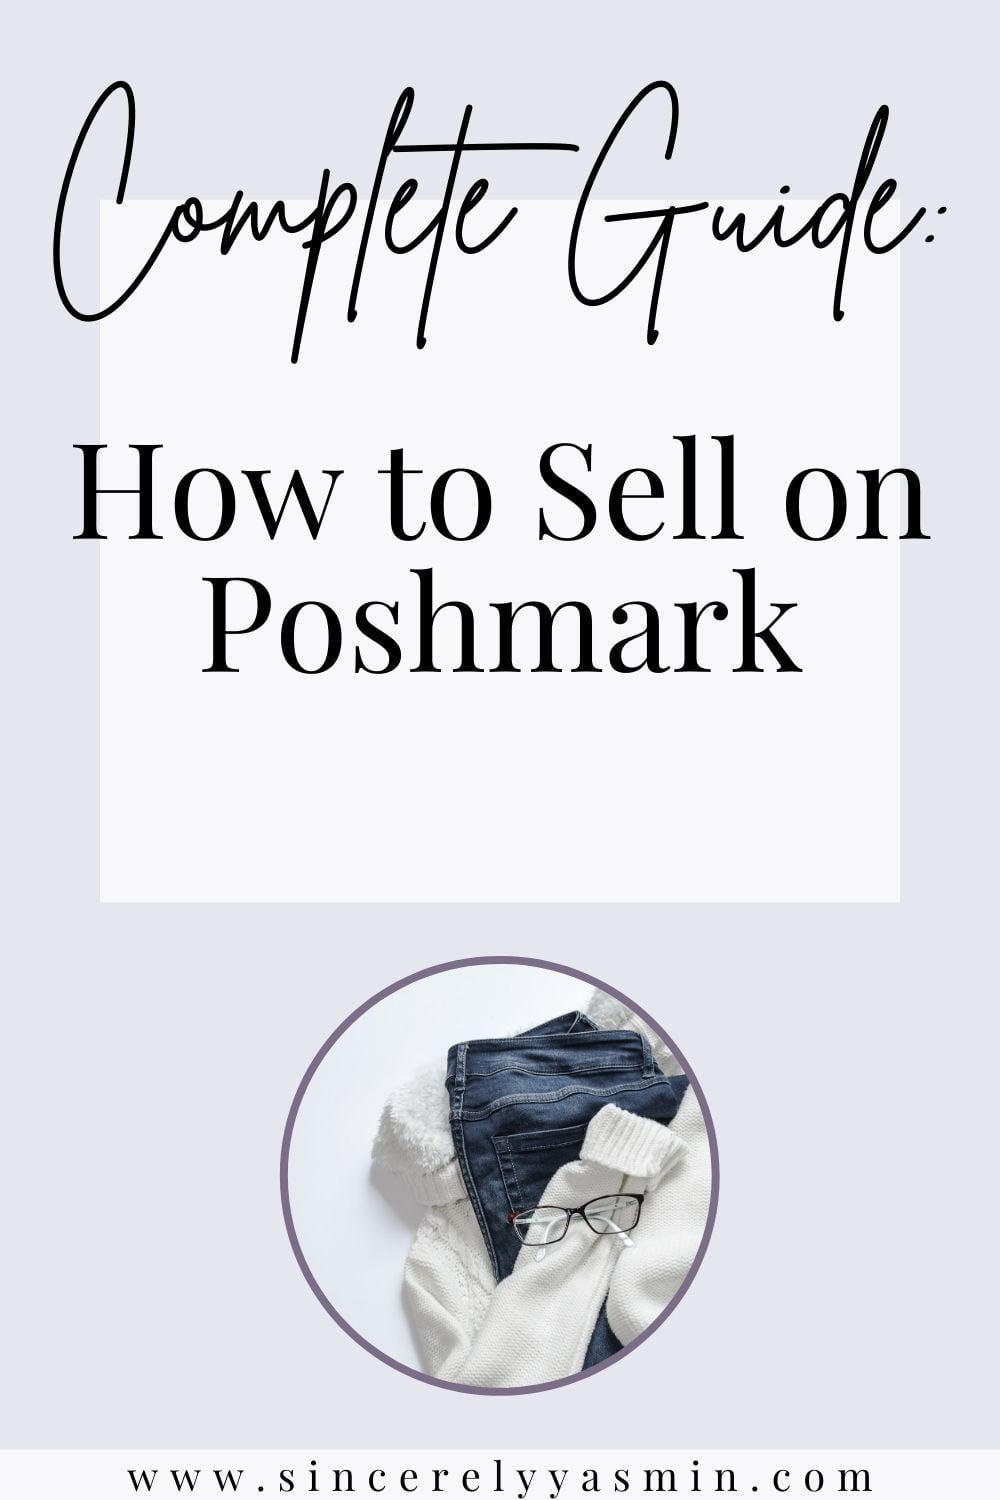 Selling on Poshmark | The Complete Guide